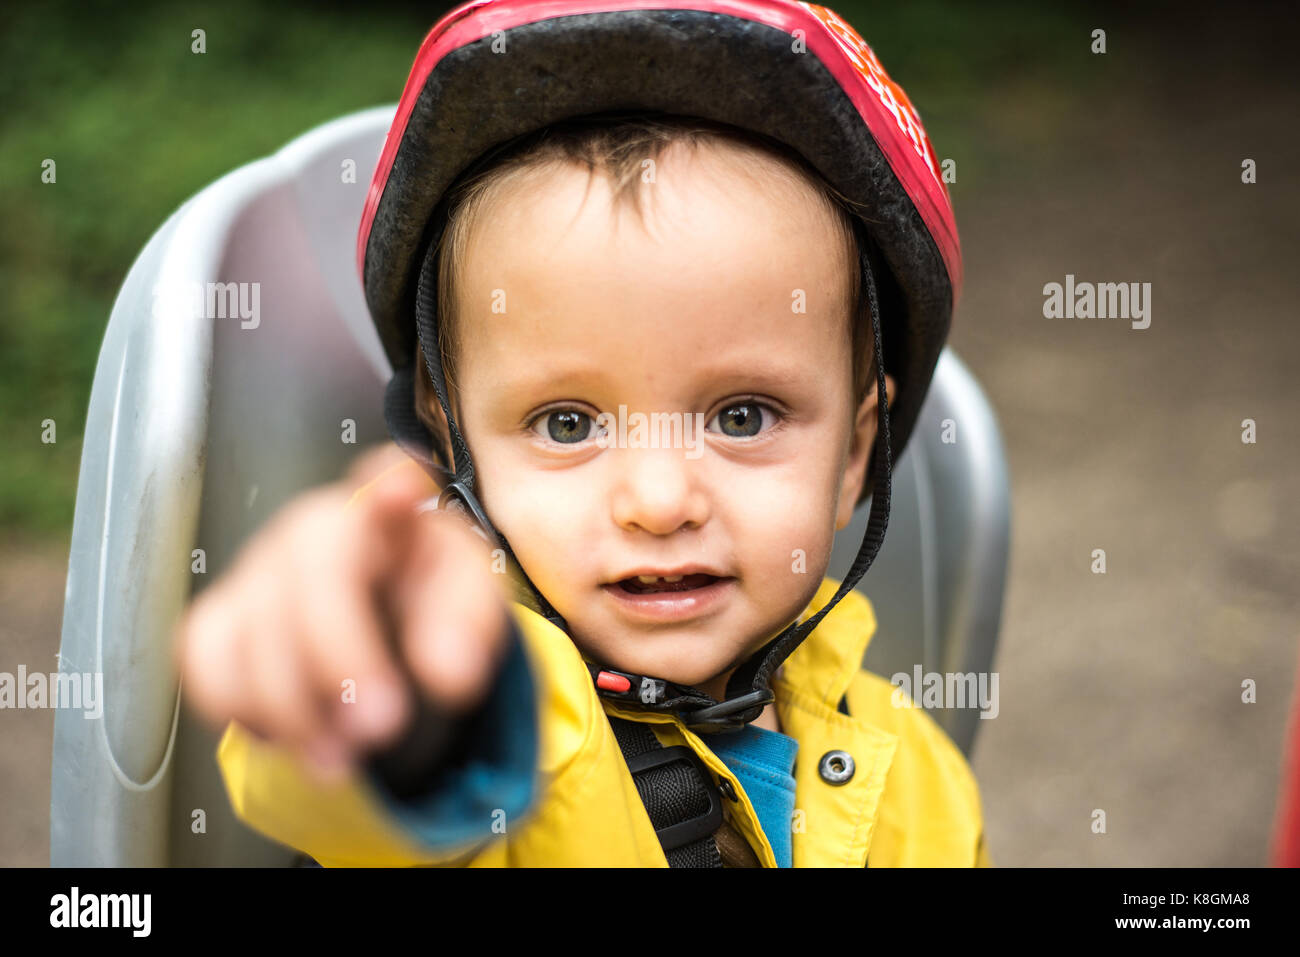 Portrait of young boy sitting in child's seat of adult bicycle, pointing Stock Photo